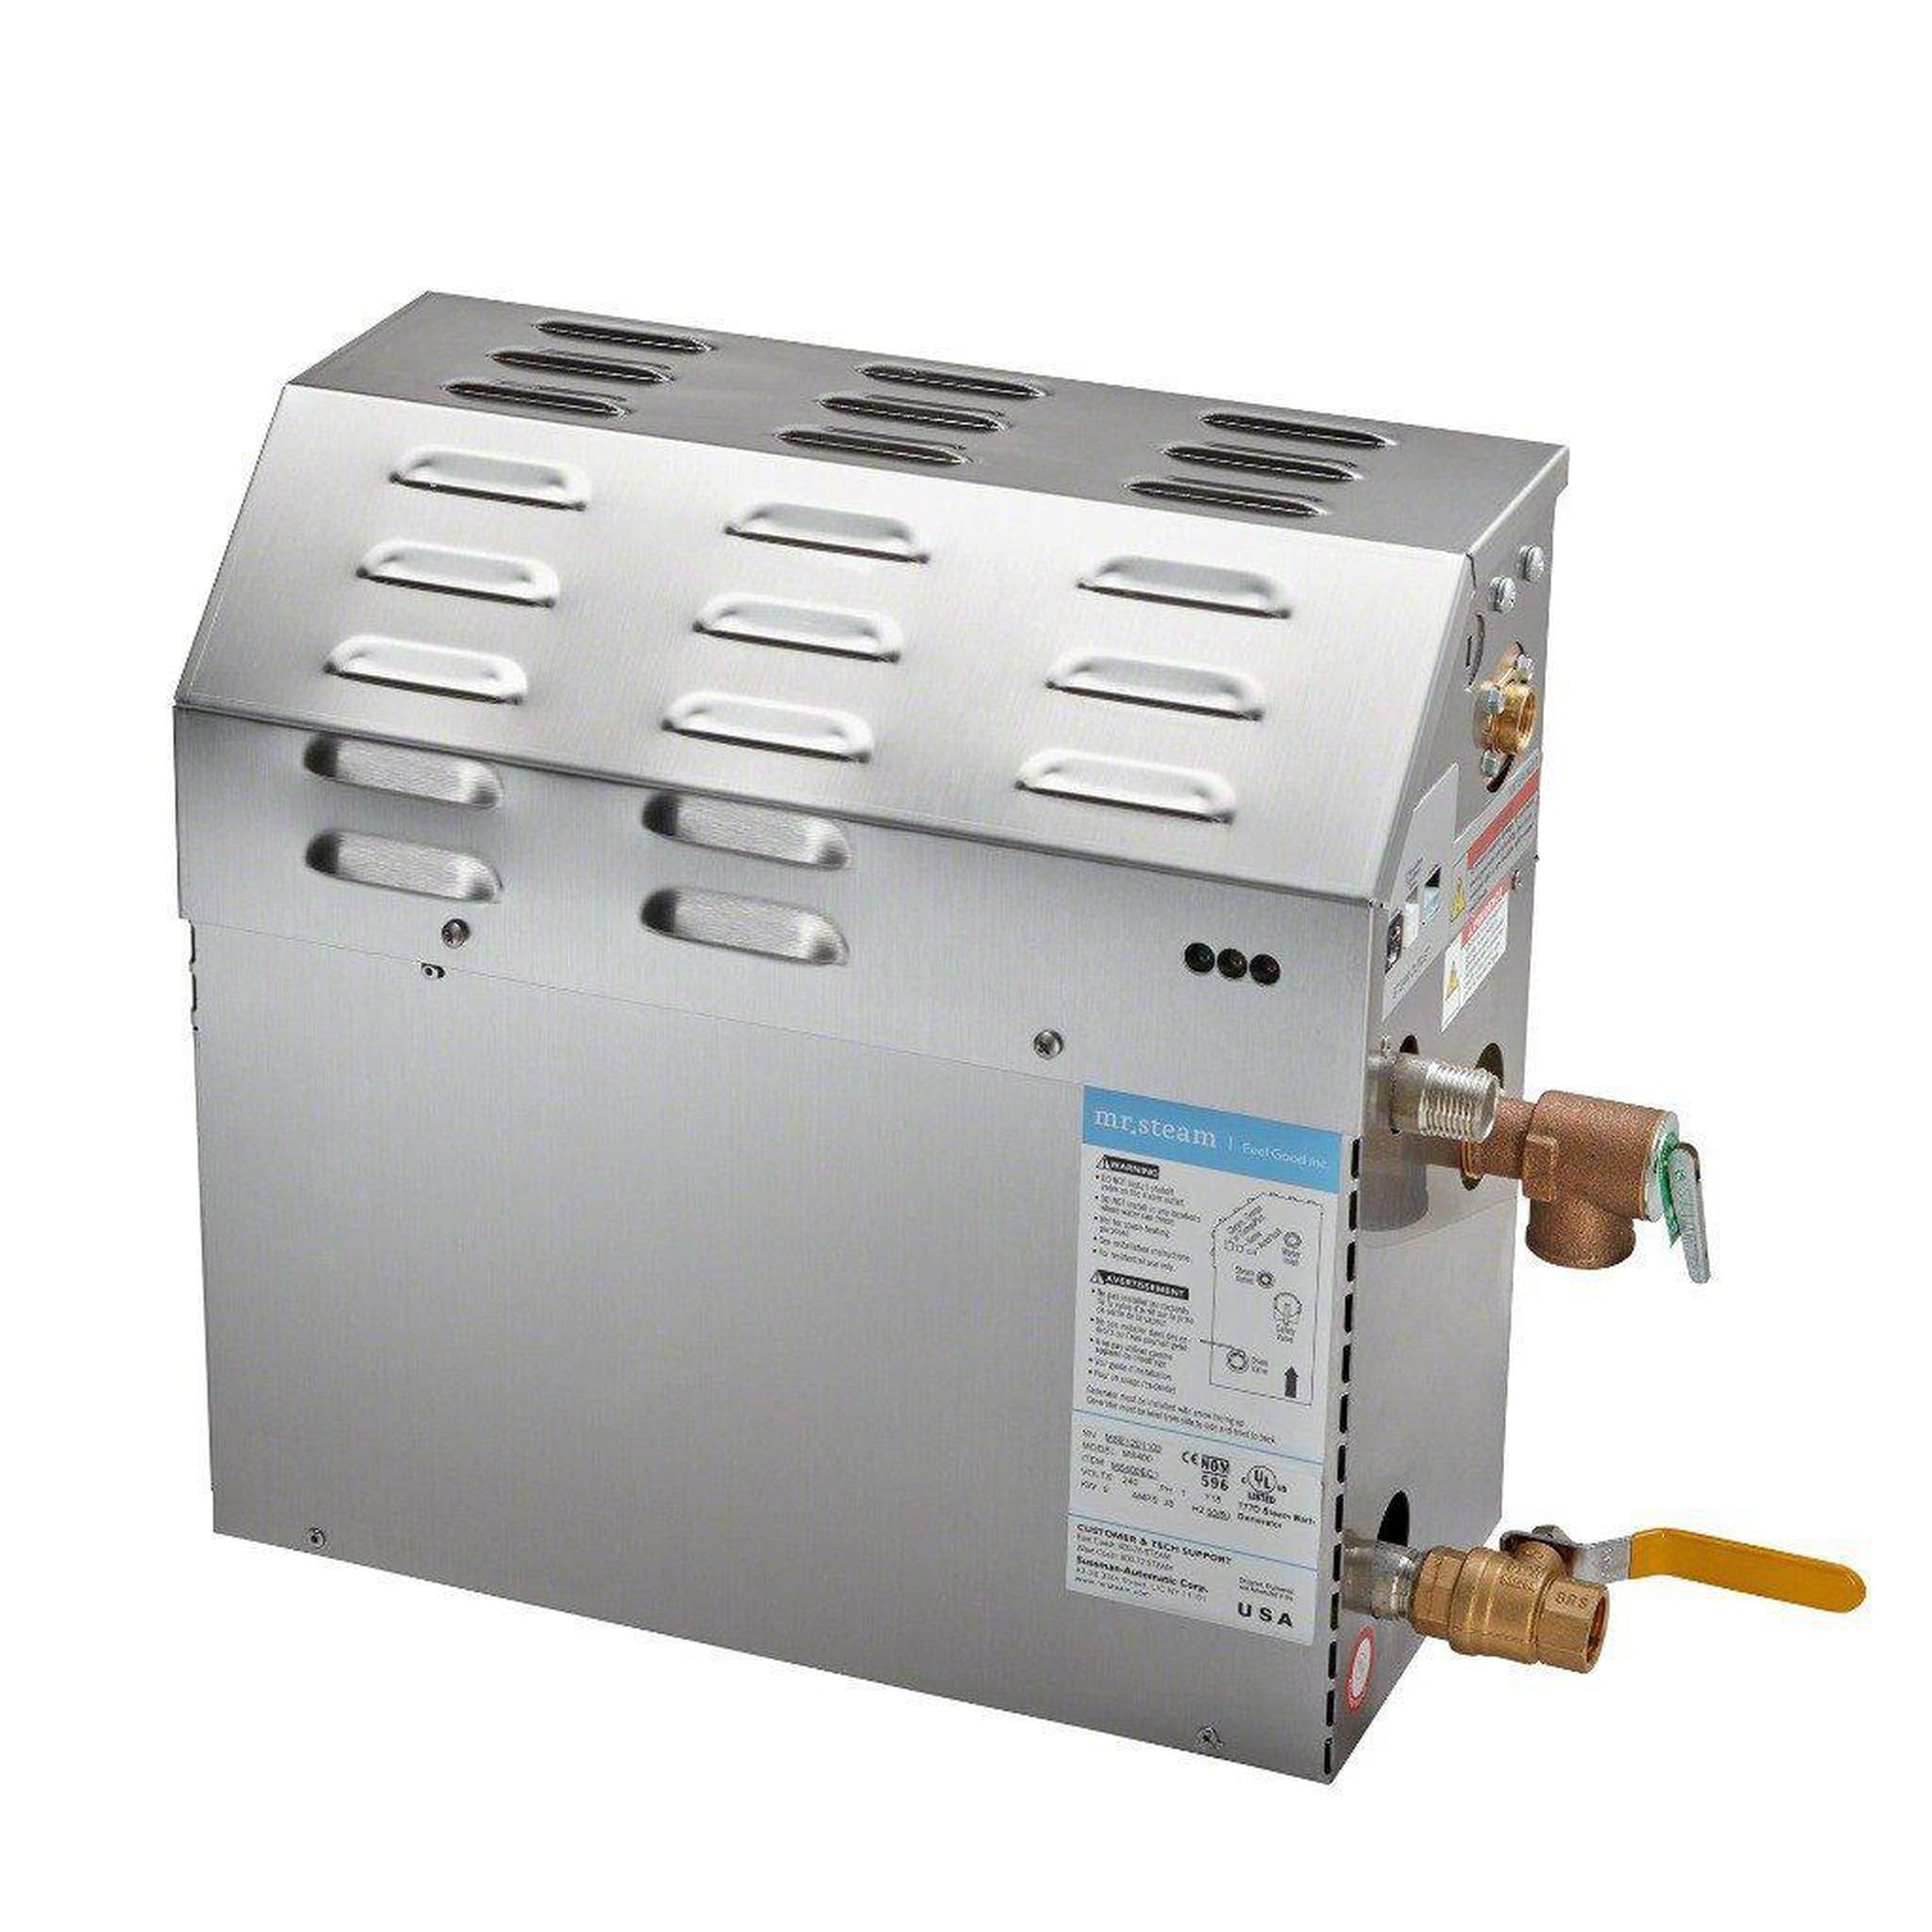 MrSteam e-SERIES MS90EC1 5 kW Steam Generator with iTempoPlus Polished Chrome Control